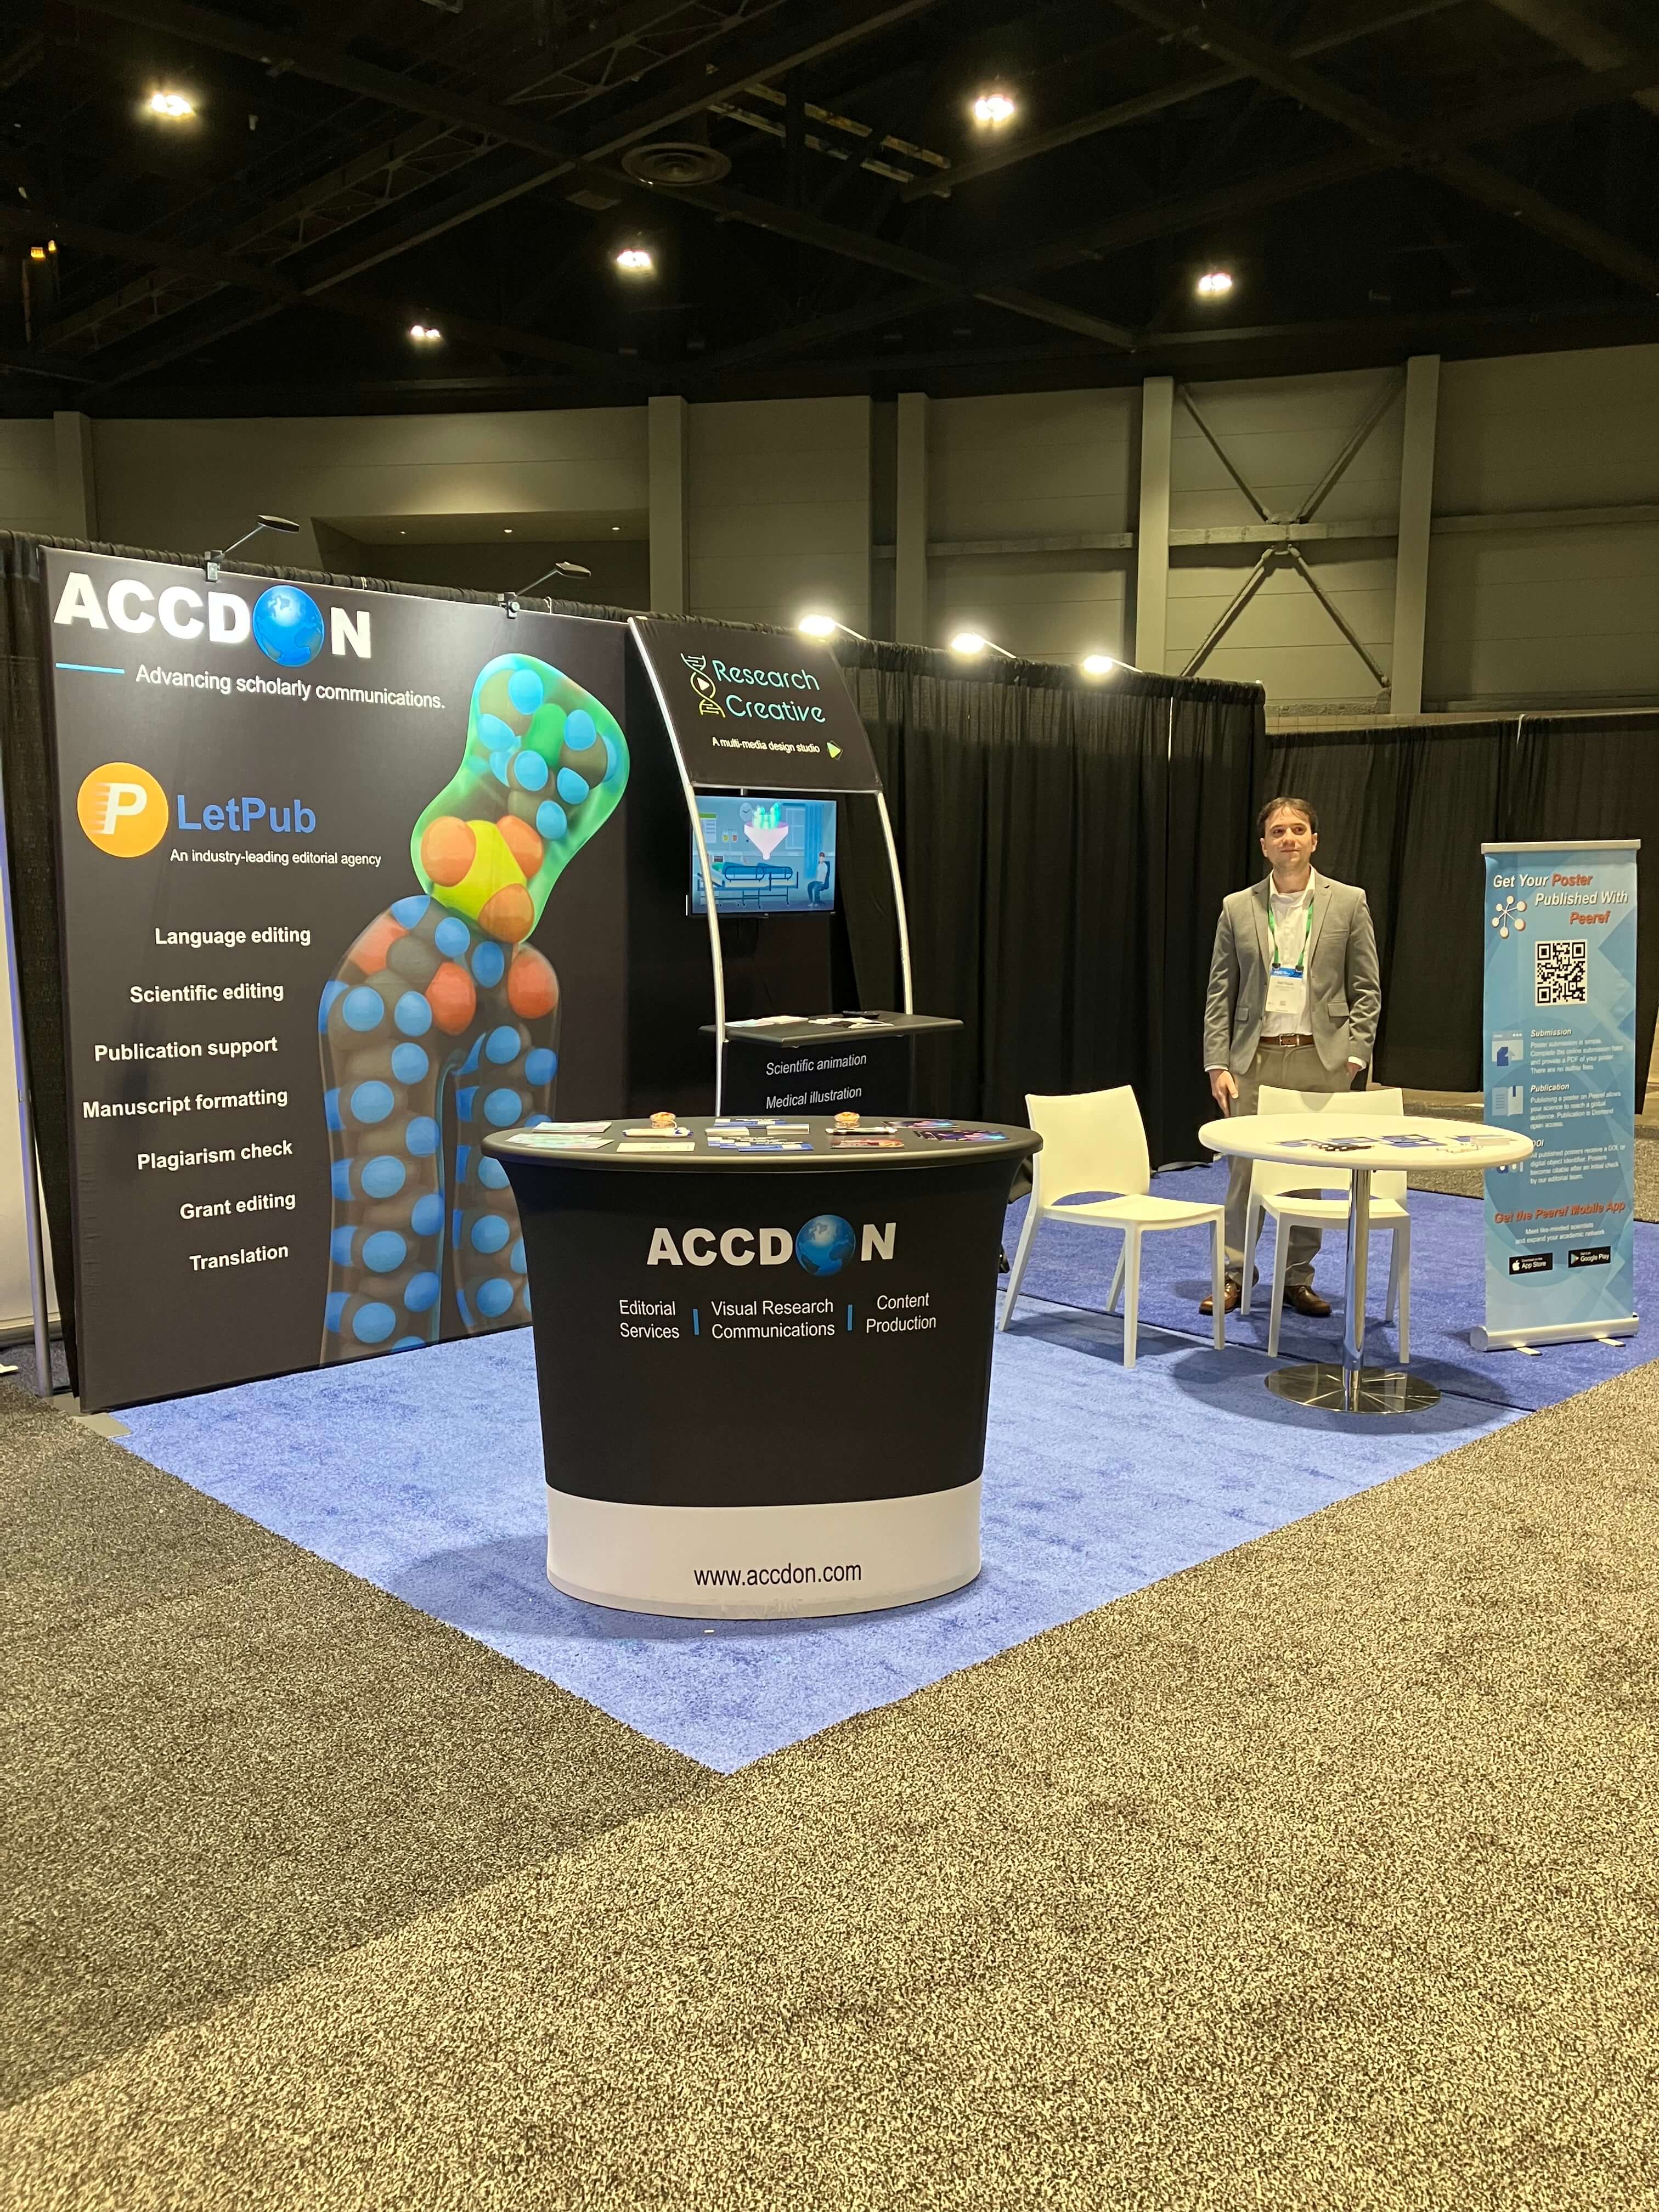 Accdon Exhibits at the American Geophysical Union (AGU) Fall Meeting